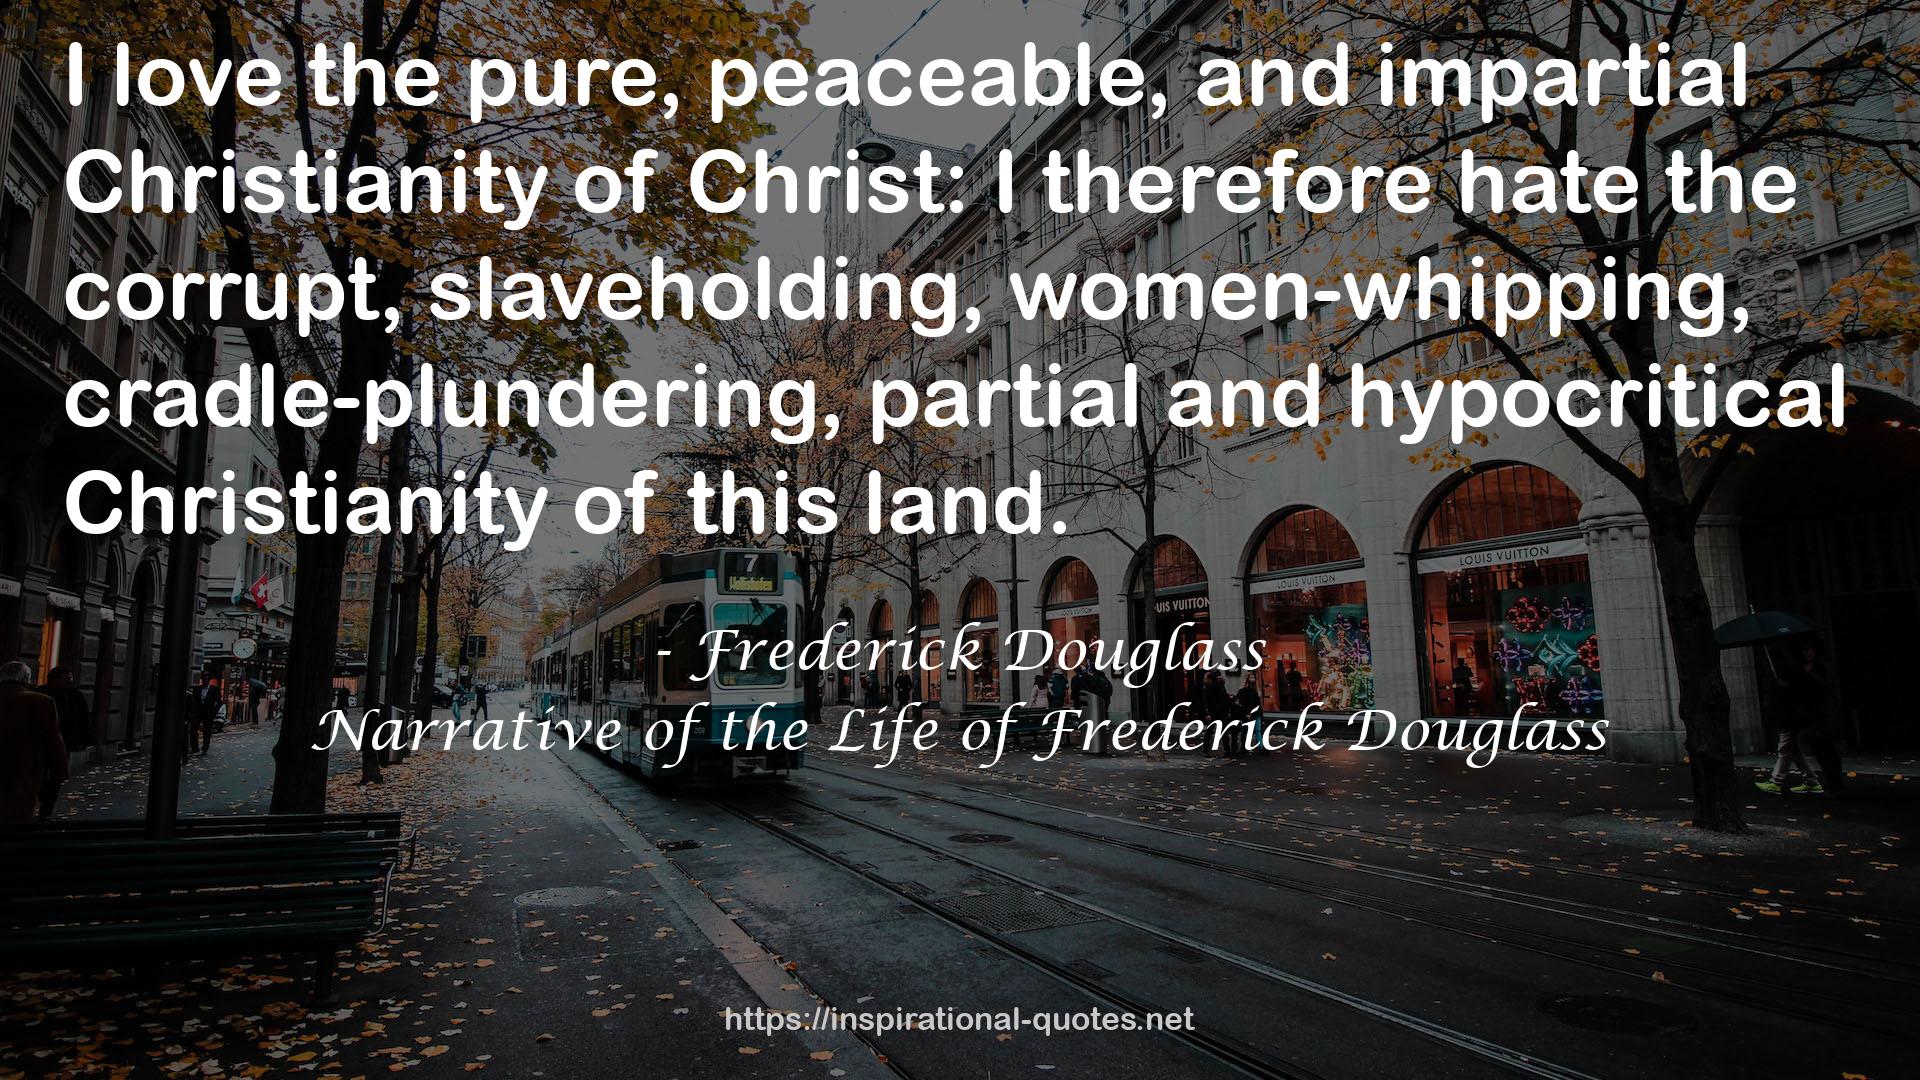 the pure, peaceable, and impartial Christianity  QUOTES